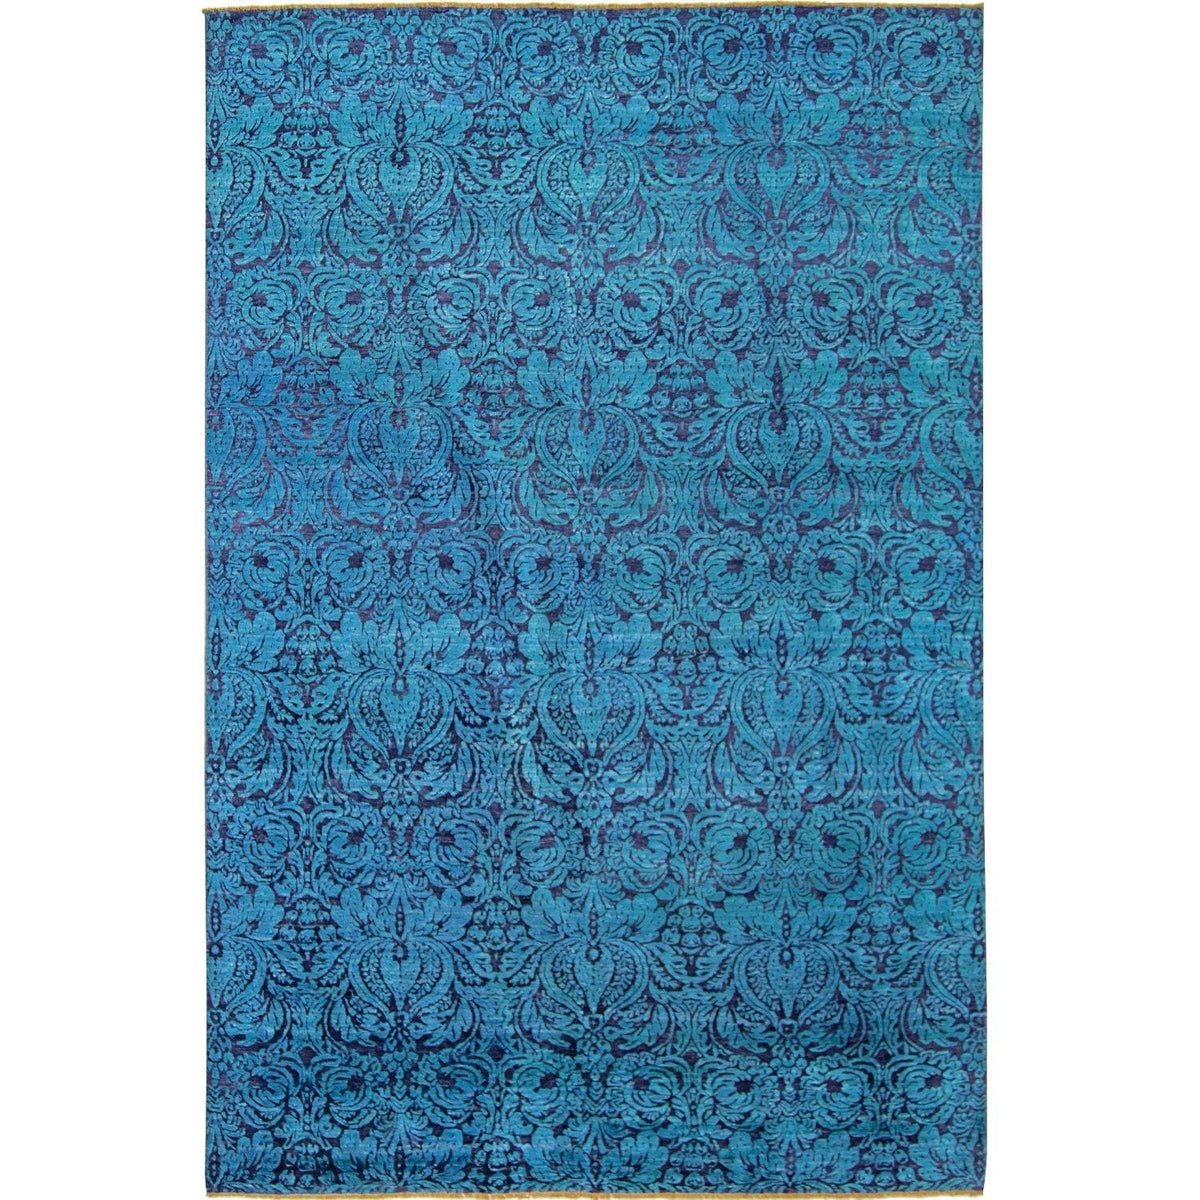 Contemporary Hand-knotted NZ Wool and Bamboo Silk Damask Rug 197cm x 299cm